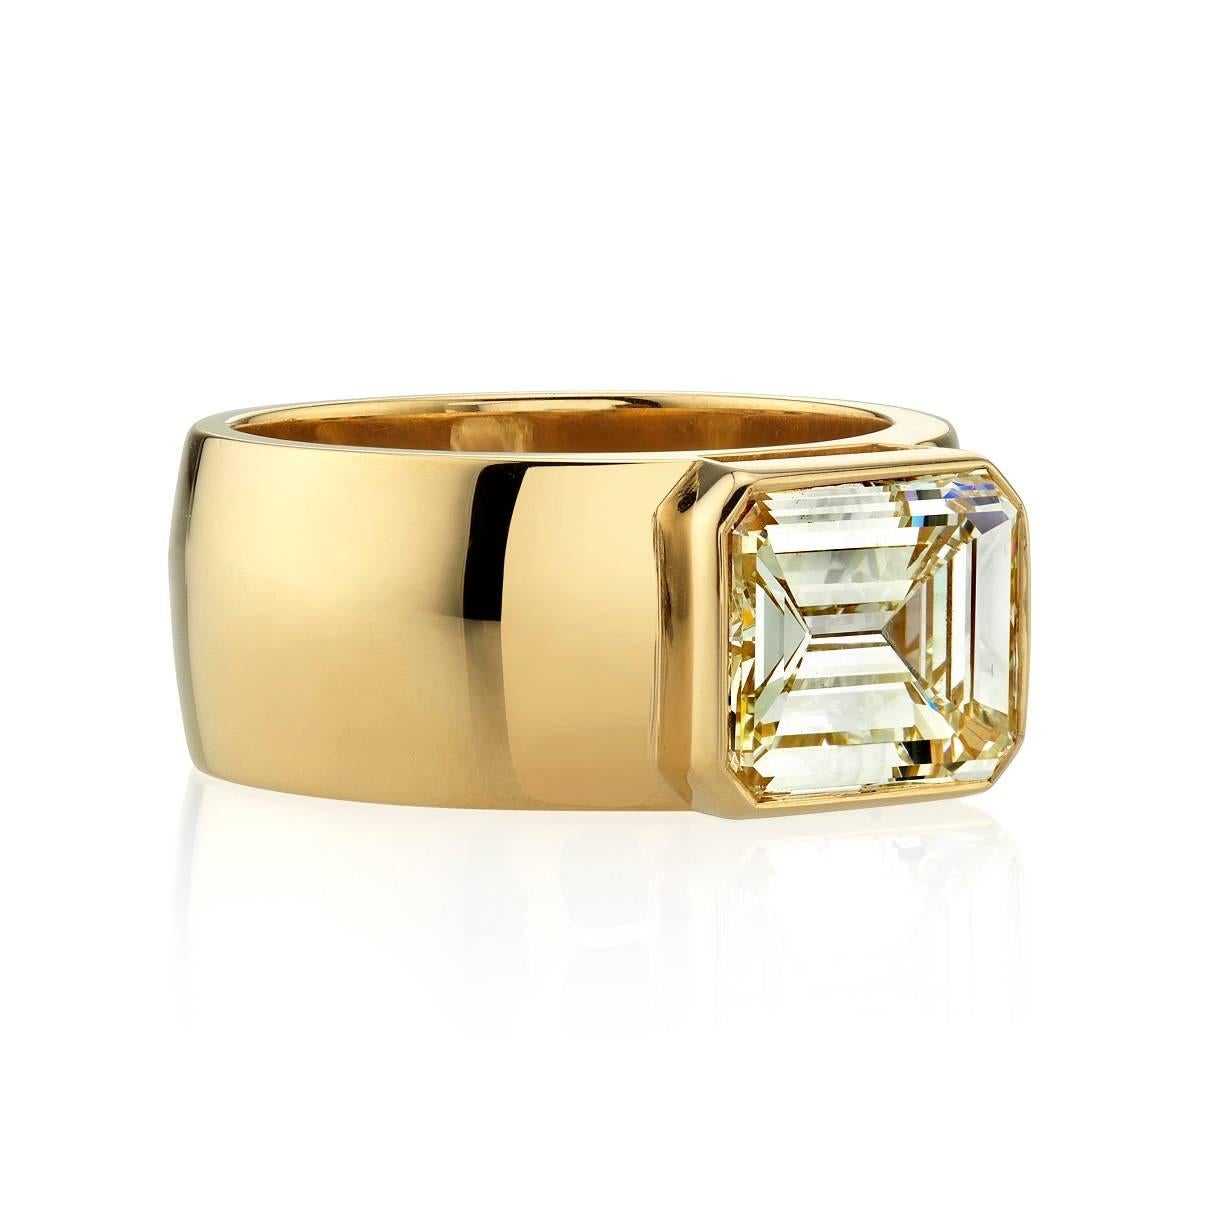 3.39ct L/VS1 GIA certified Emerald cut diamond set in a handcrafted 18k yellow gold mounting. A bold and sleek design. 

Ring is currently a size 6 and can be sized to fit.